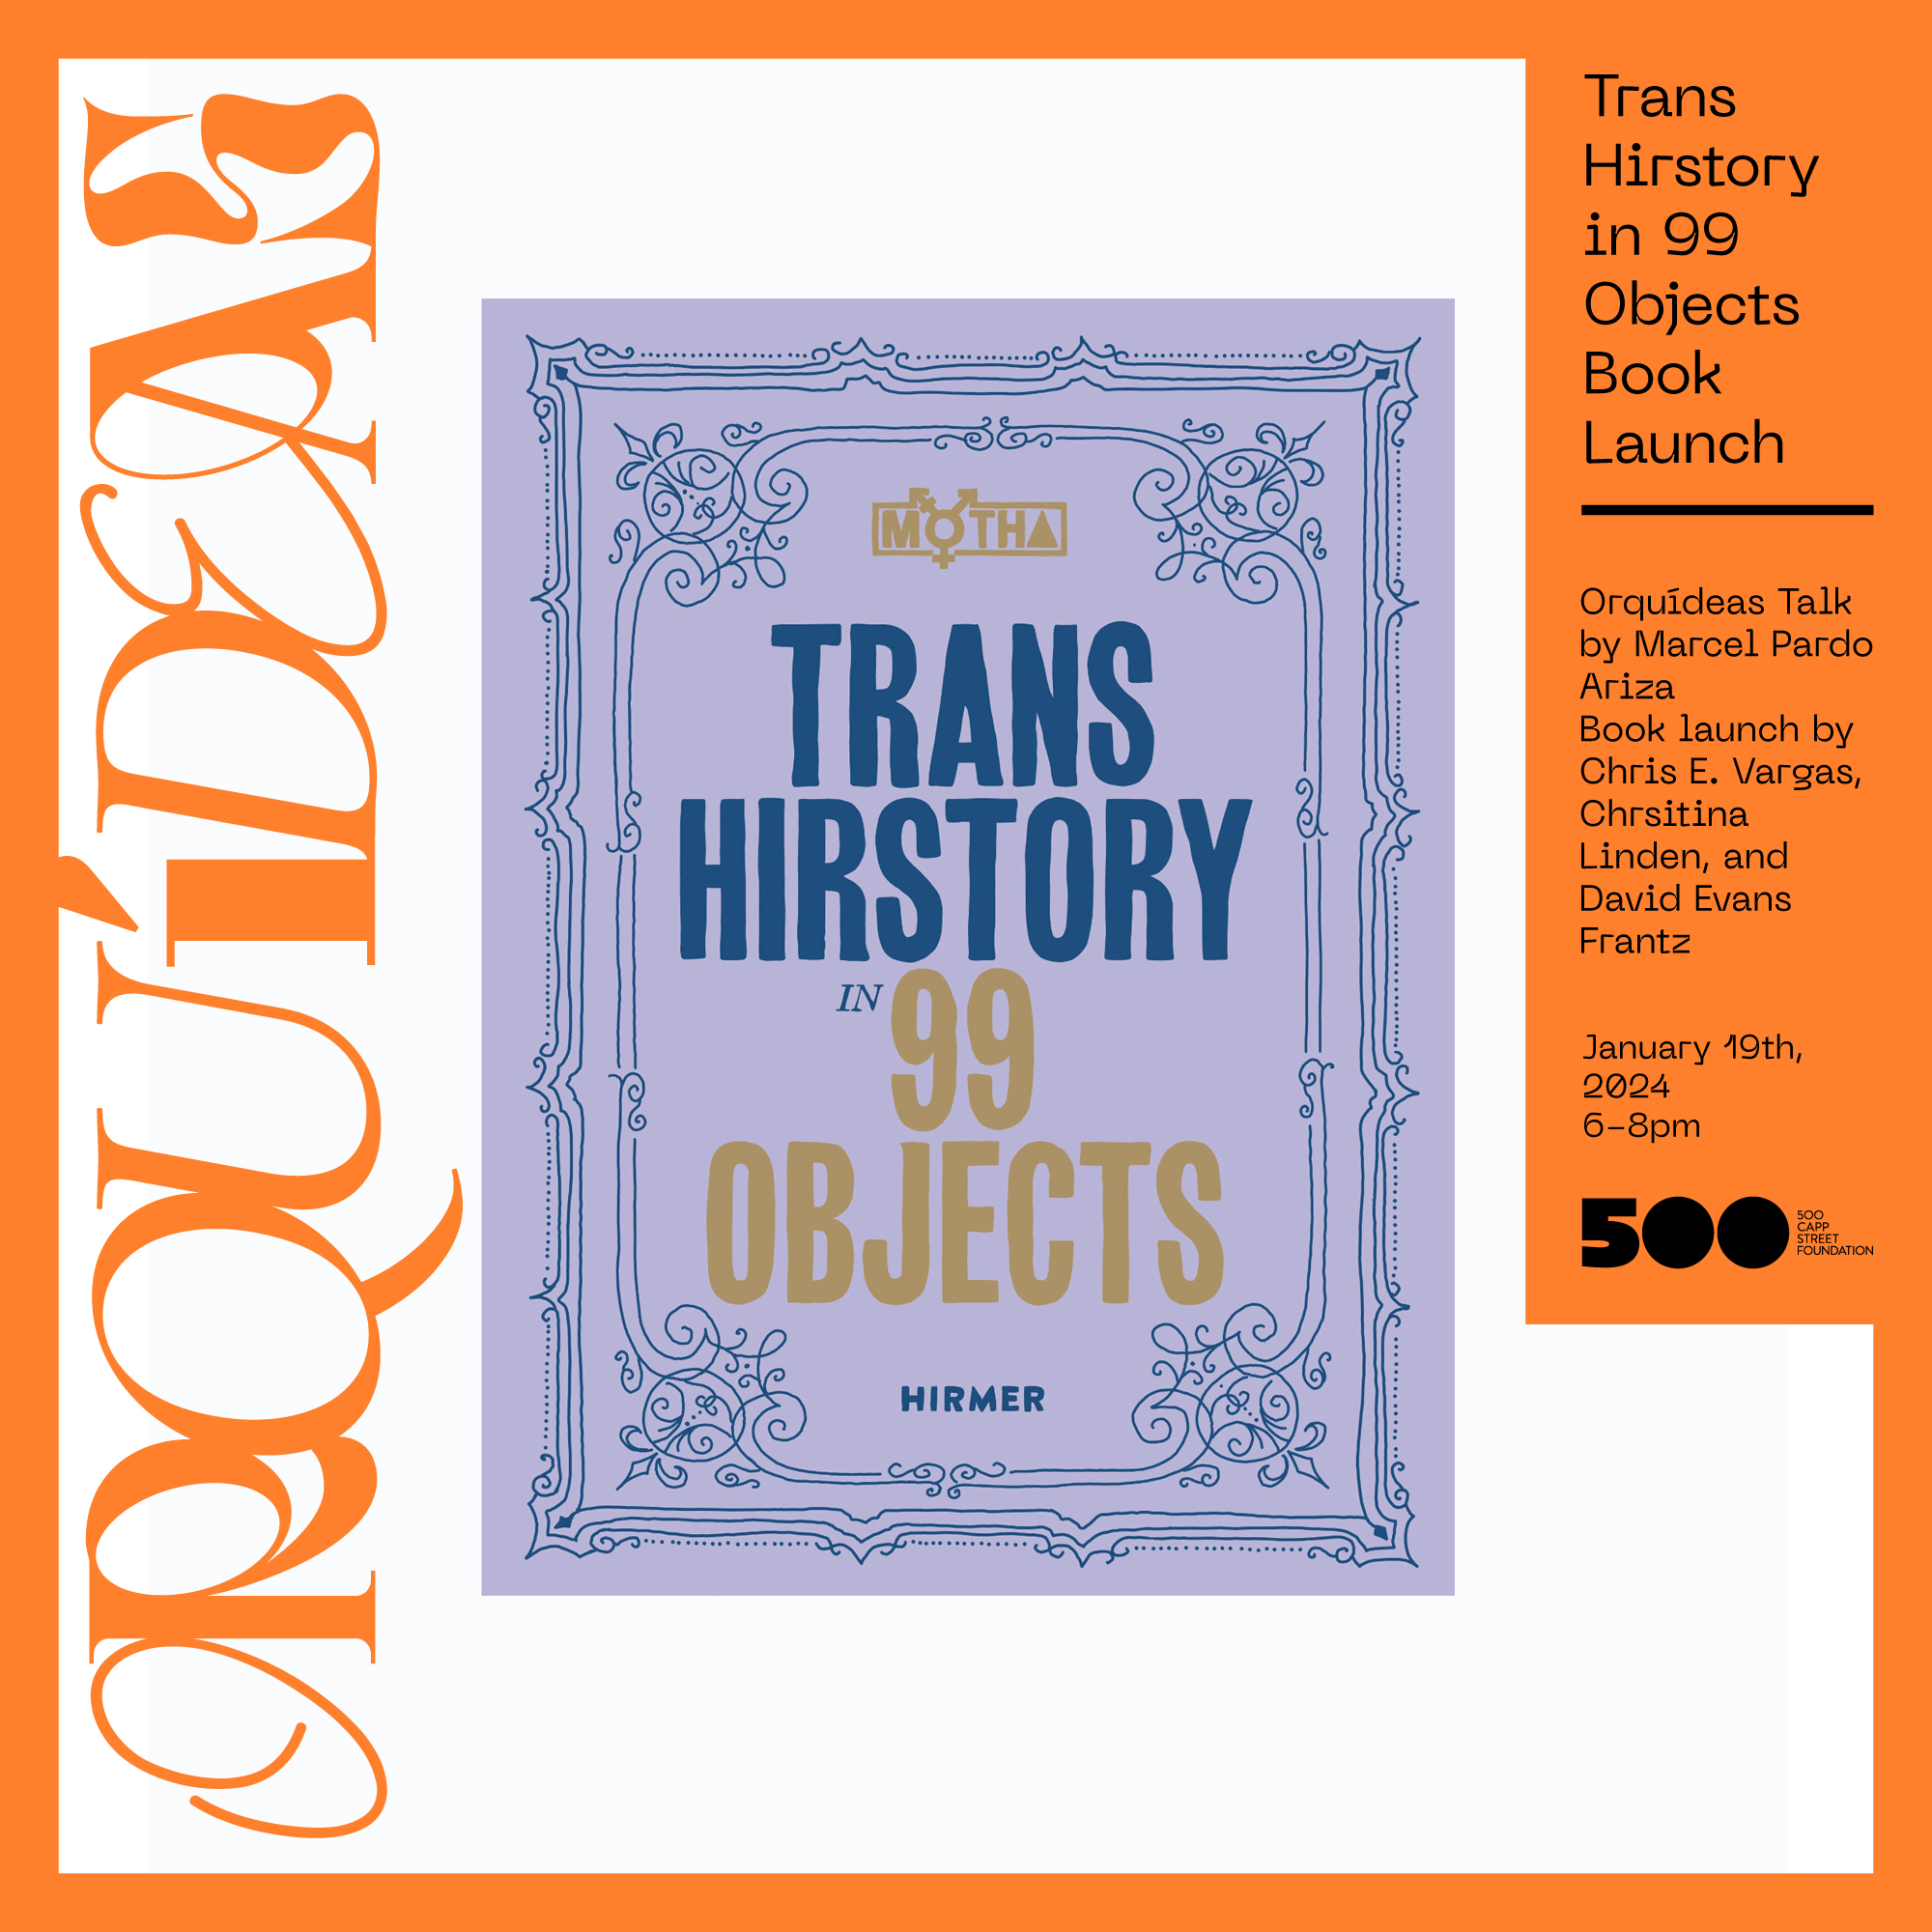  Orquídeas Wrap-Up Talk by Marcel Pardo Ariza & “Trans Hirstory in 99 Objects” Book Launch 